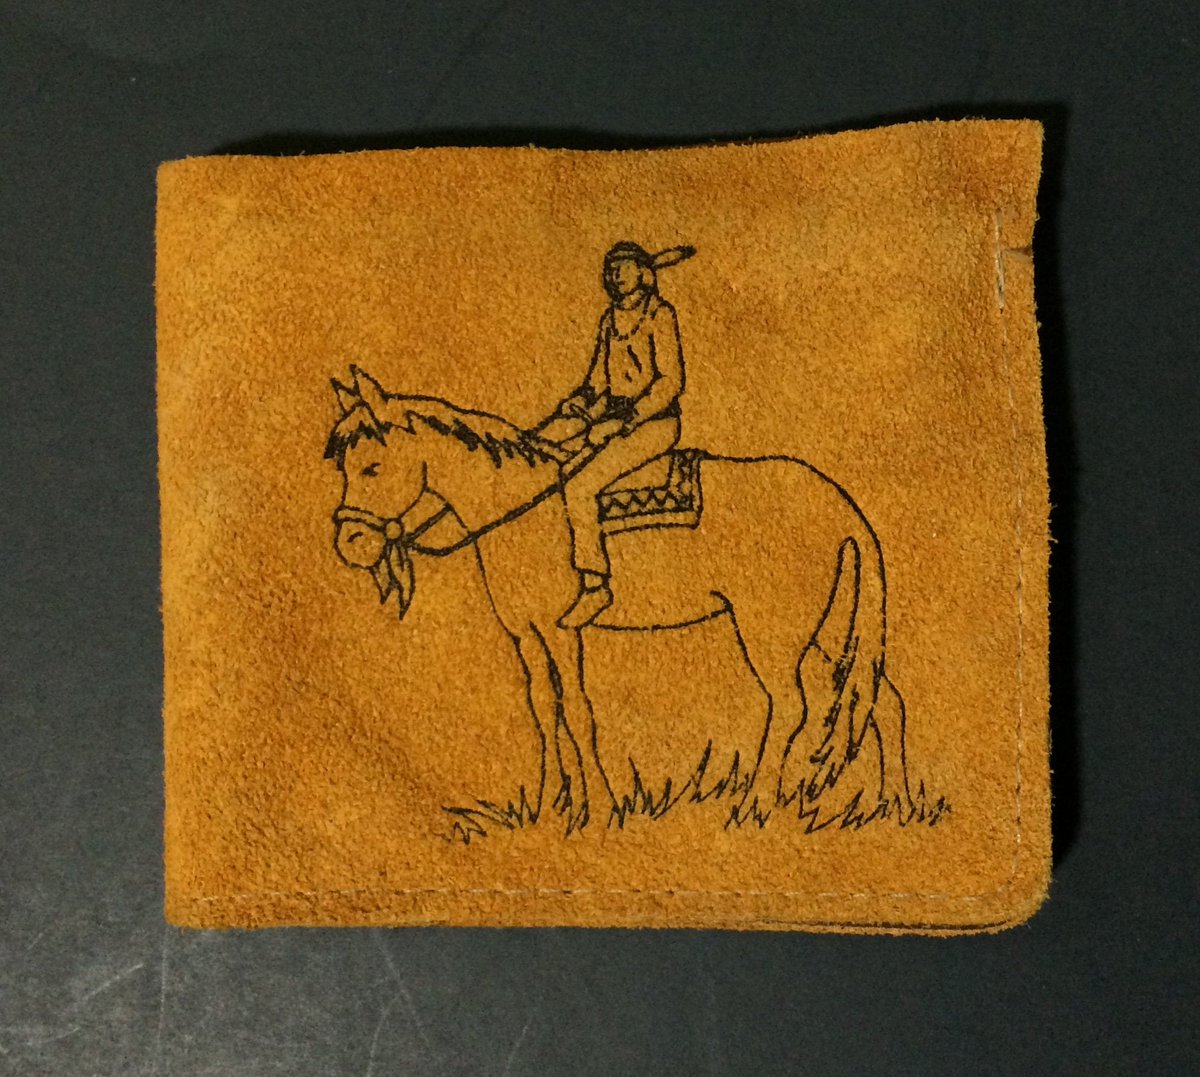 Check this out and more in our #etsy shop: 3 1/4' x 3 3/4' South Dakota Native American Indian + Horse Brown Suede Leather Wallet etsy.me/2QSK7M9 #accessories #wallet #vintage #southdakota #nativeamerican #brownsuede #suedewallet #brownwallet #horse